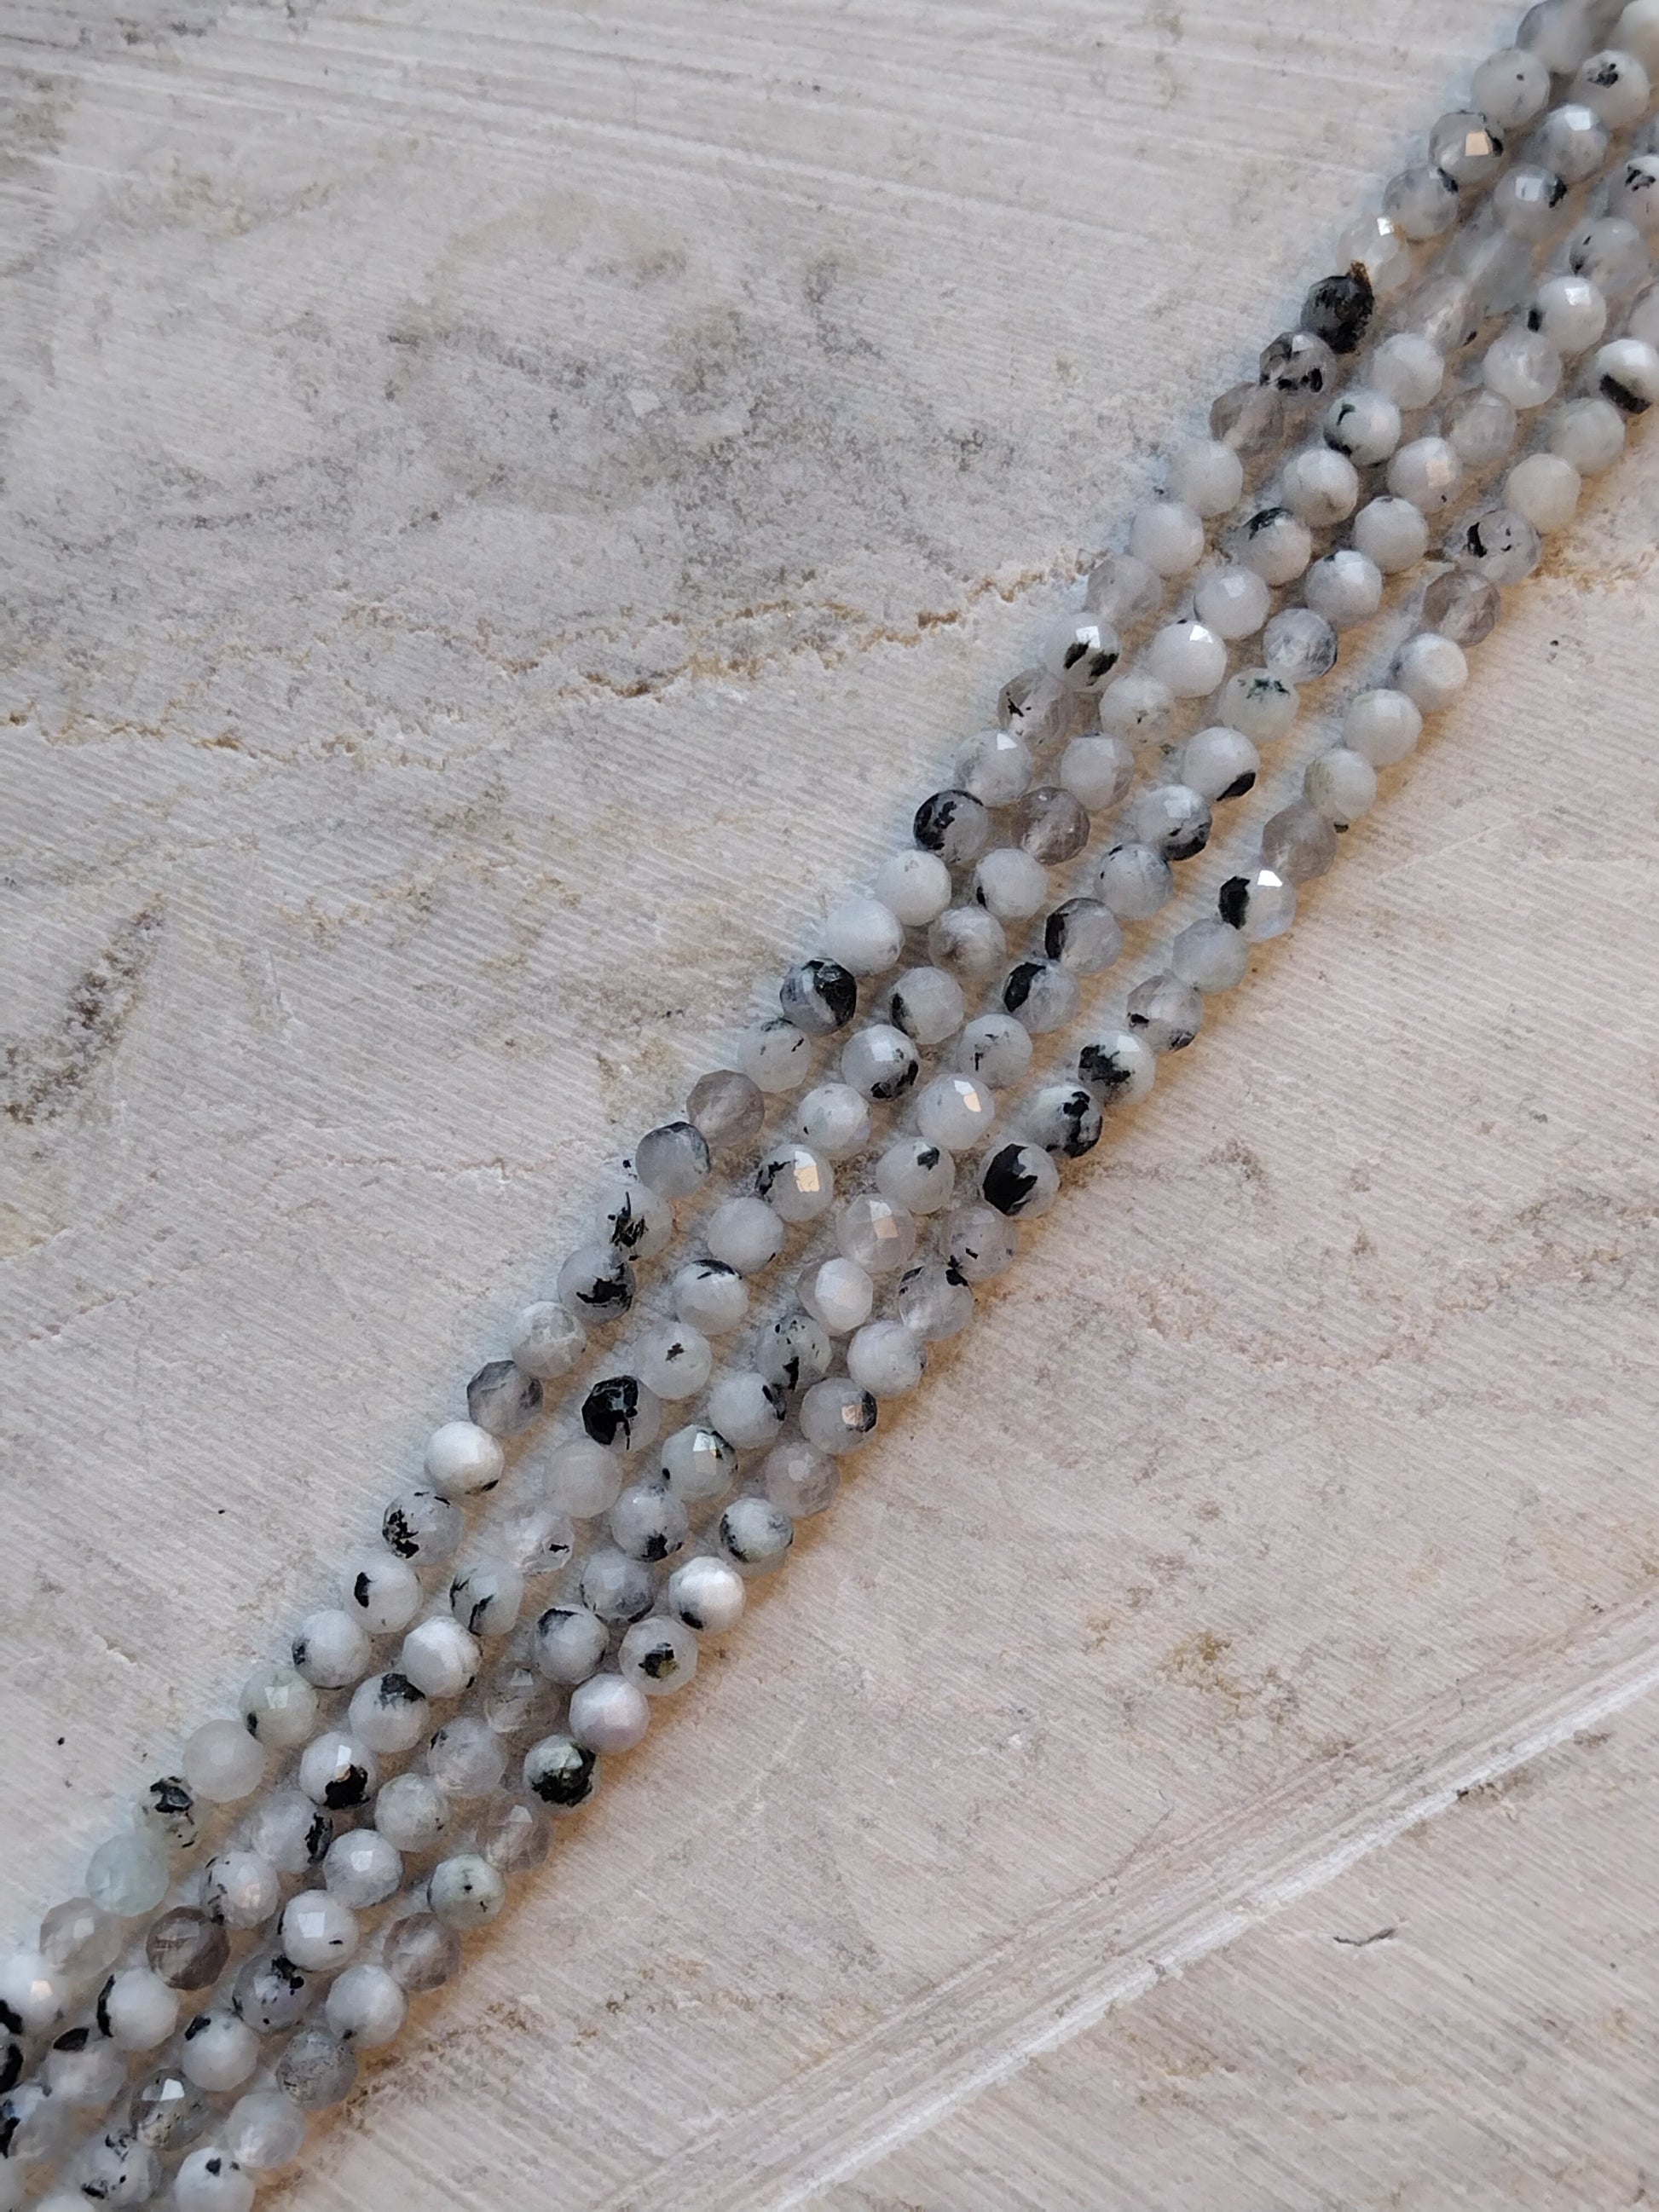 Crafting supplies such as moonstone beads available at wholesale and retail prices, only at our crystal shop in San Diego!